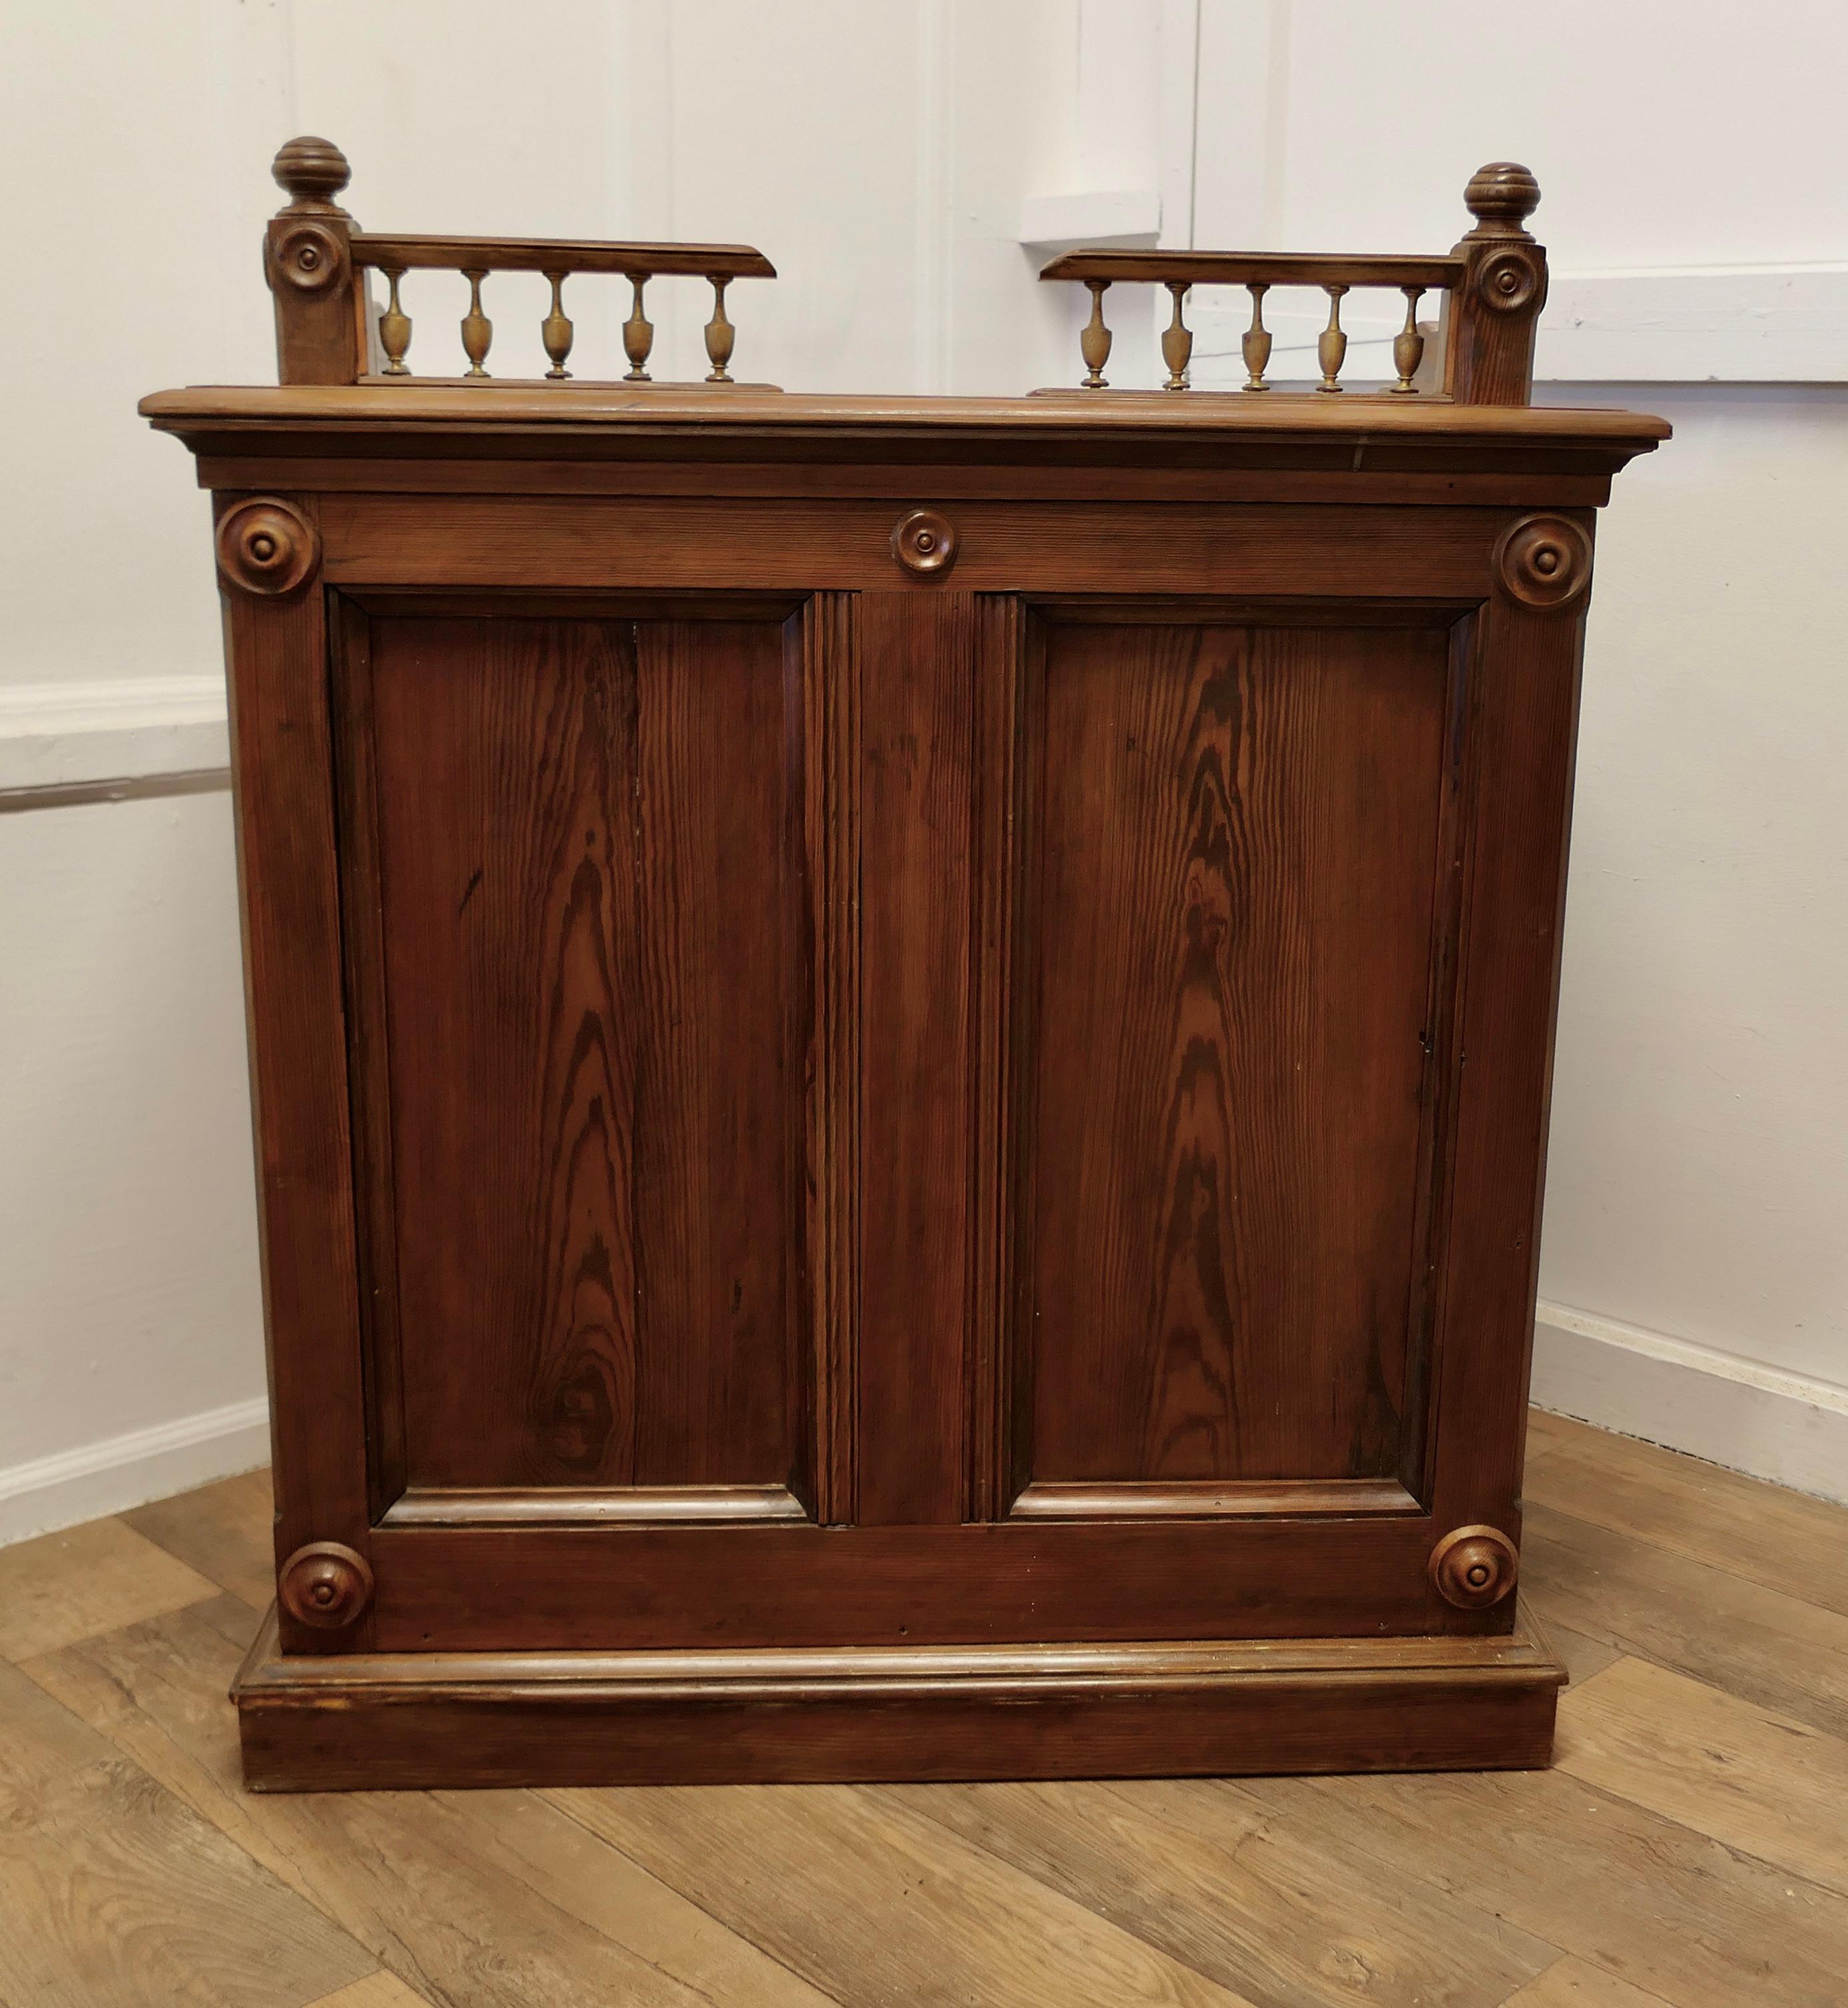 Pitch Pine Hotel Restaurant Reception Hostess Greeting Station, Greeter

A Good Heavy Pitch Pine Front of House Oak Greeter, the front and sides of the desk are panelled and decorated with roundels and the top has a decorative gallery
At the